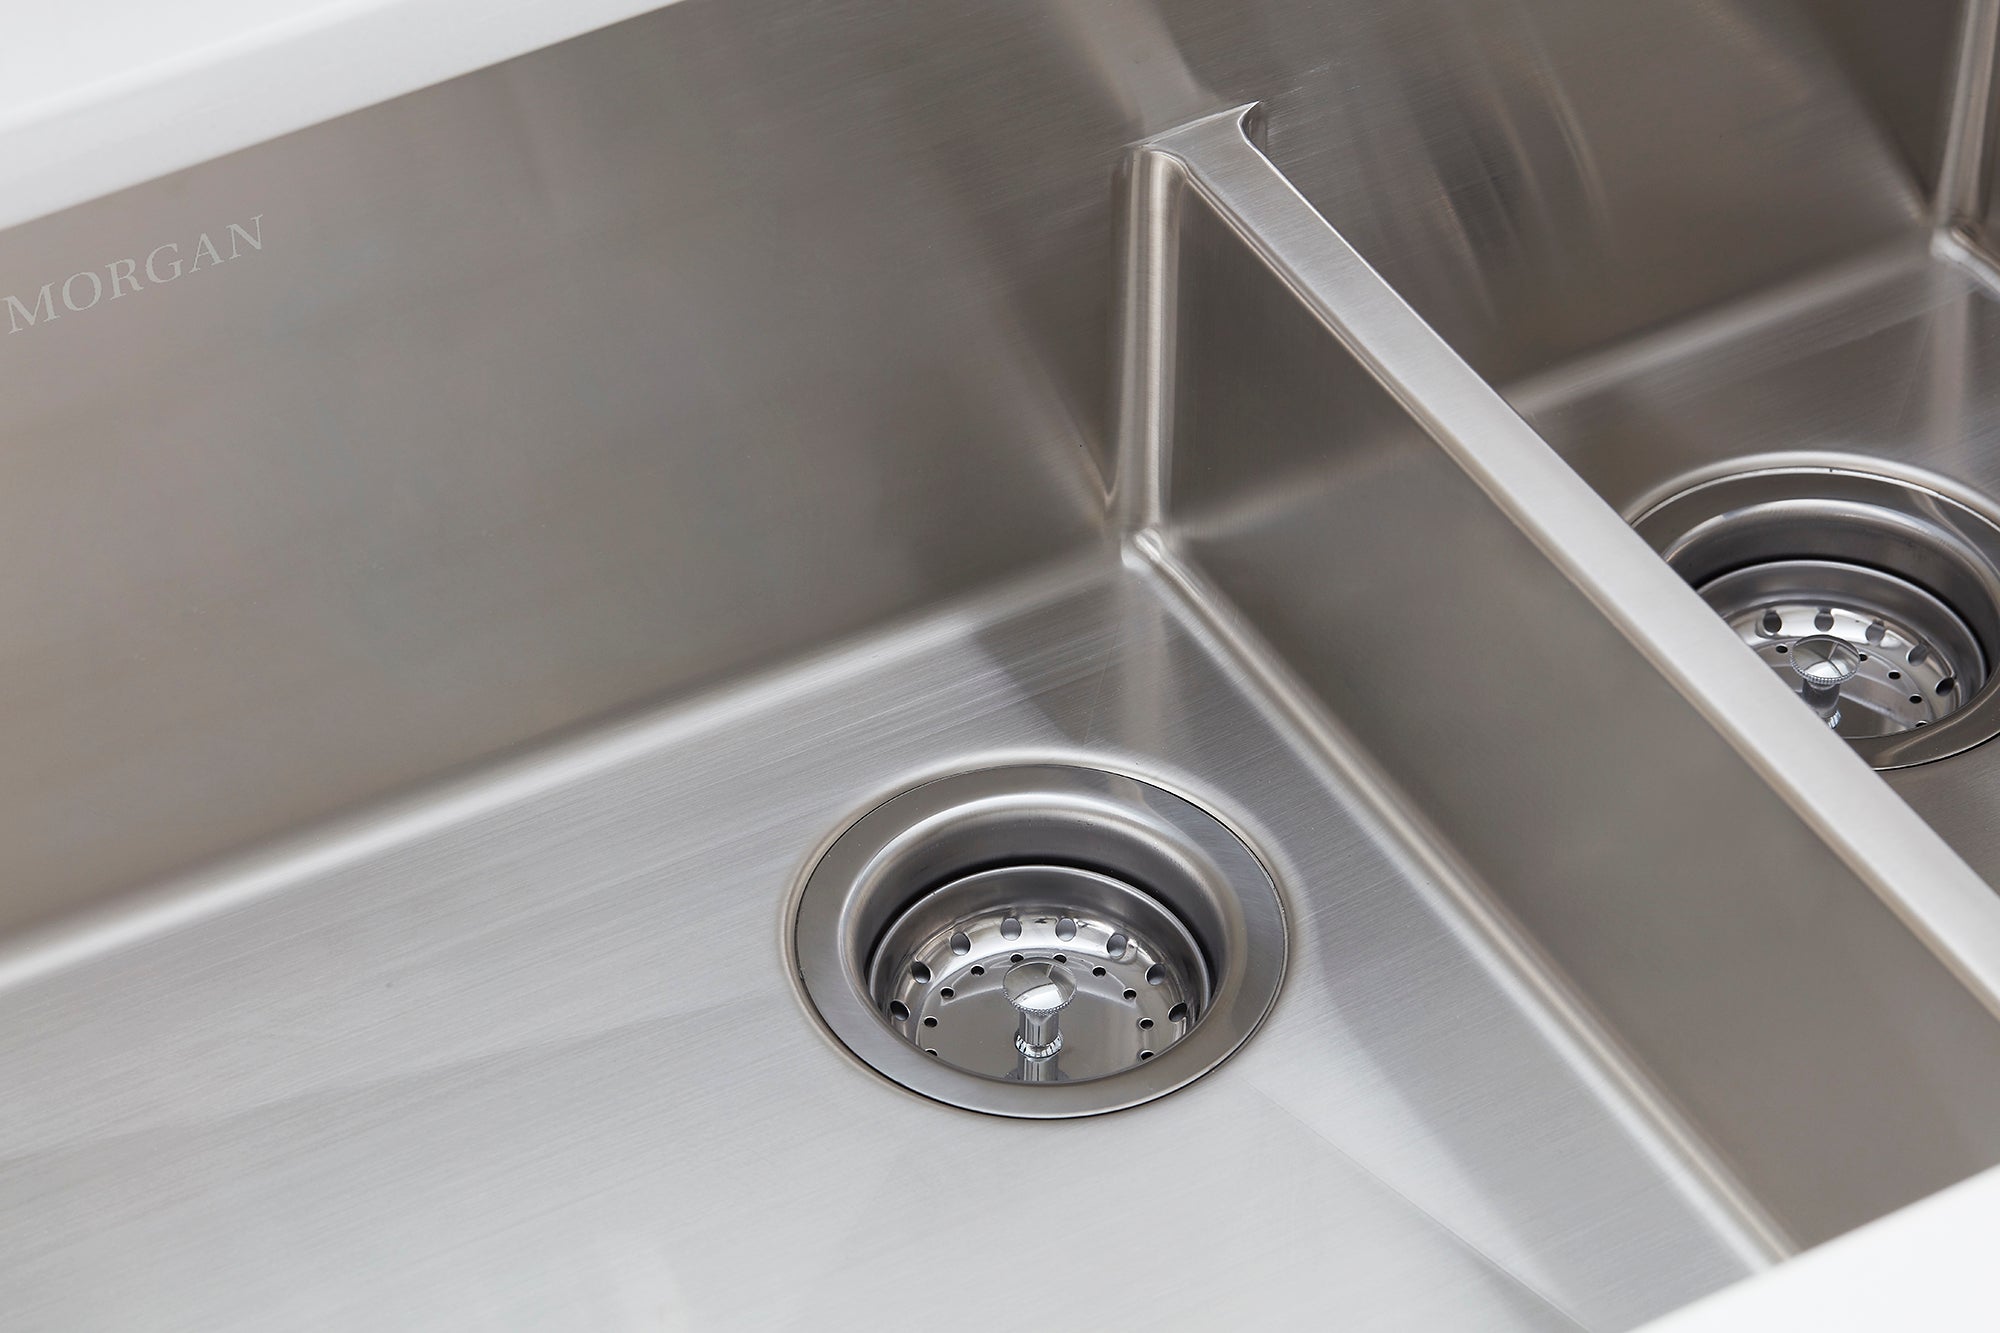 Morgan Tap and Basin Double Bowl Undermount Sink Offset Drain Close-up